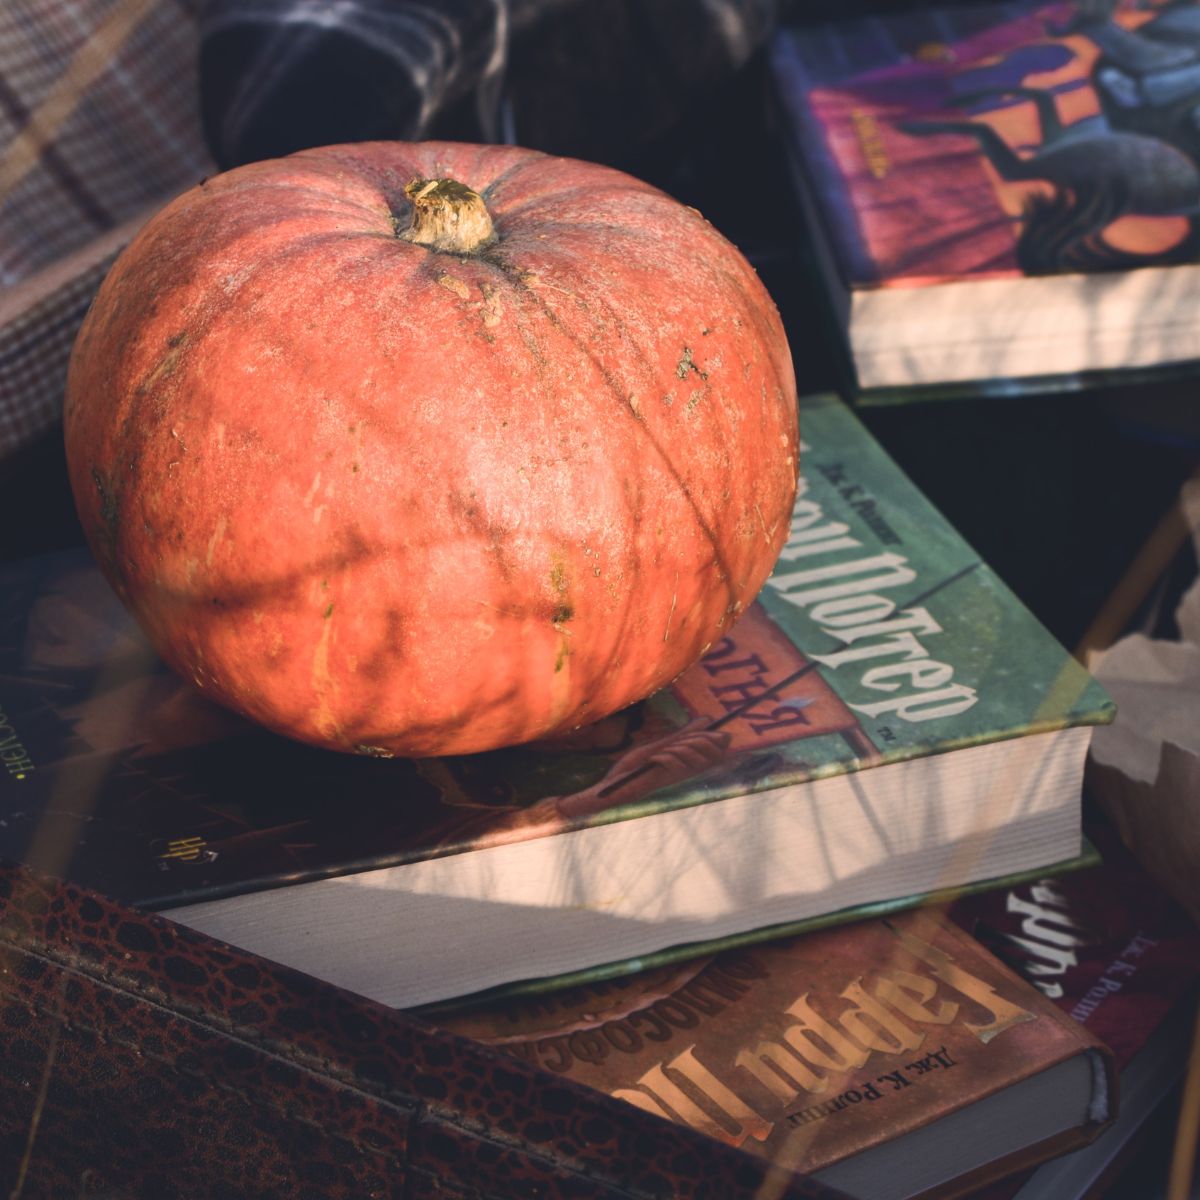 A stack of Halloween books with a pumpkin on top.